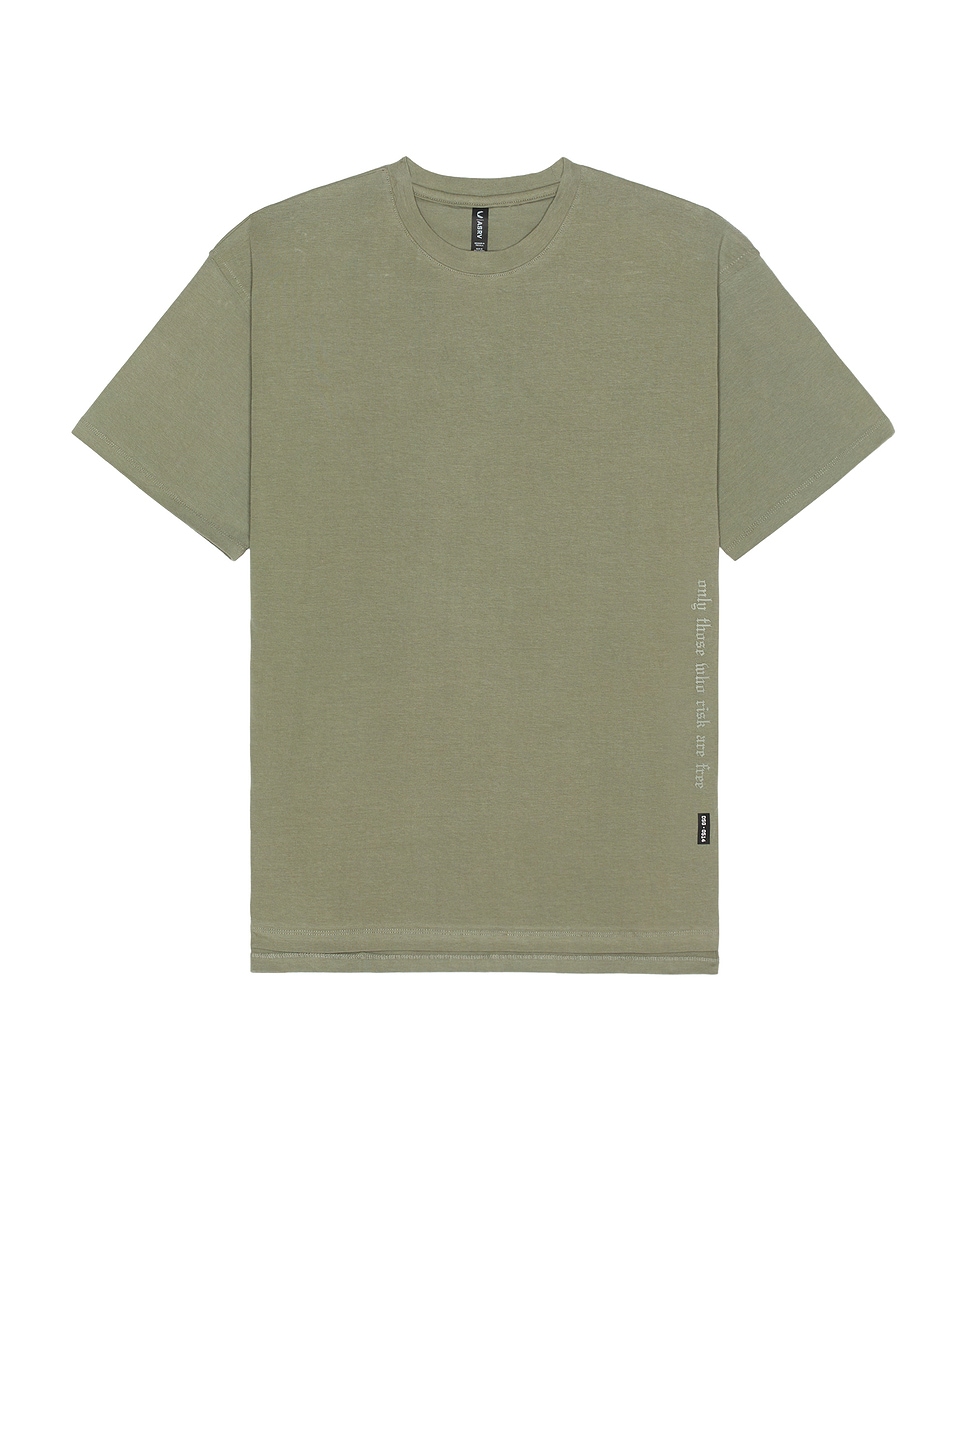 Cotton Plus Oversized Tee in Green